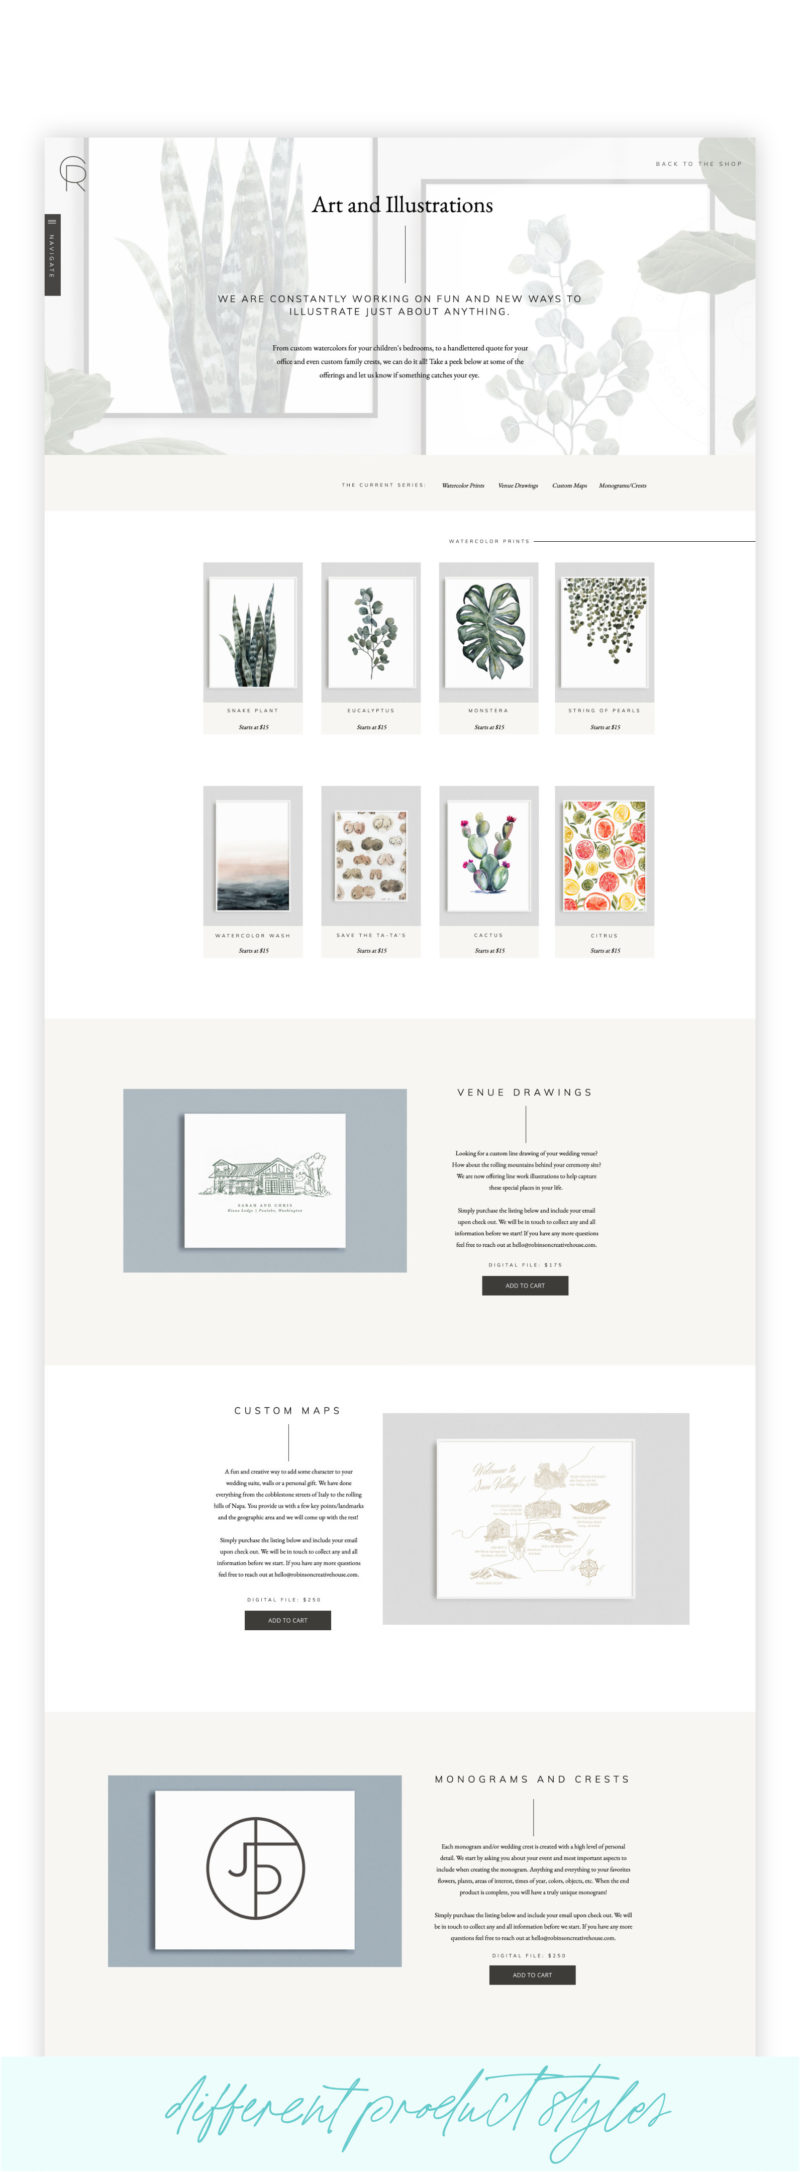 Arts and illustrations shop design in the Showit platform with multiple product styles.